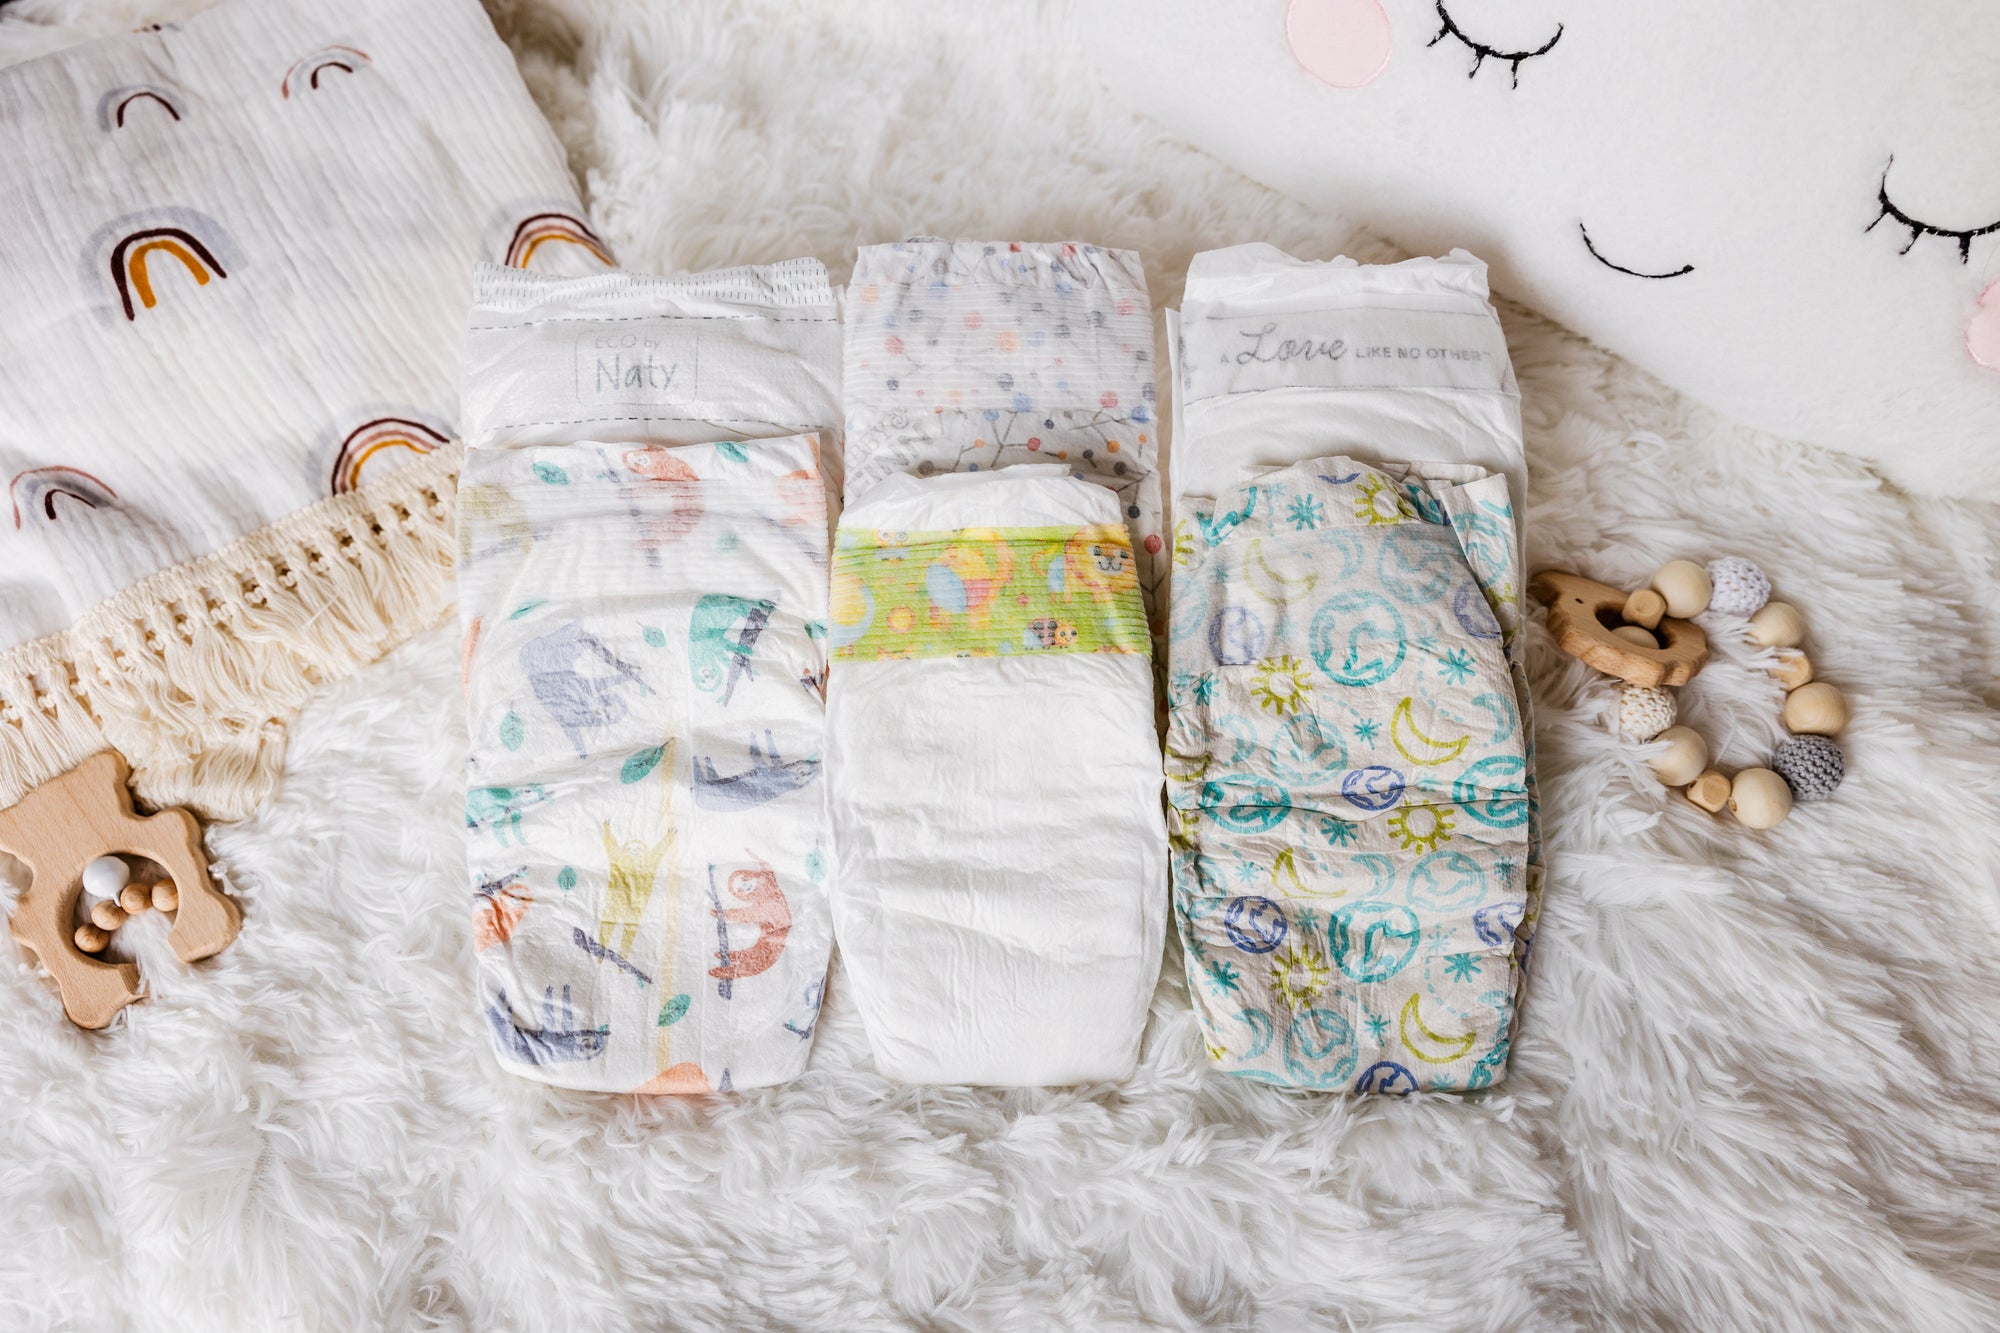 Mother Earth Diaper Sampler Package: 6 Diaper Sample Packs of size 3 eco-friendly diapers including ECO by Naty, Hello Bello, ABBY&FINN, Babyganics, Bambo Nature and Seventh Generation